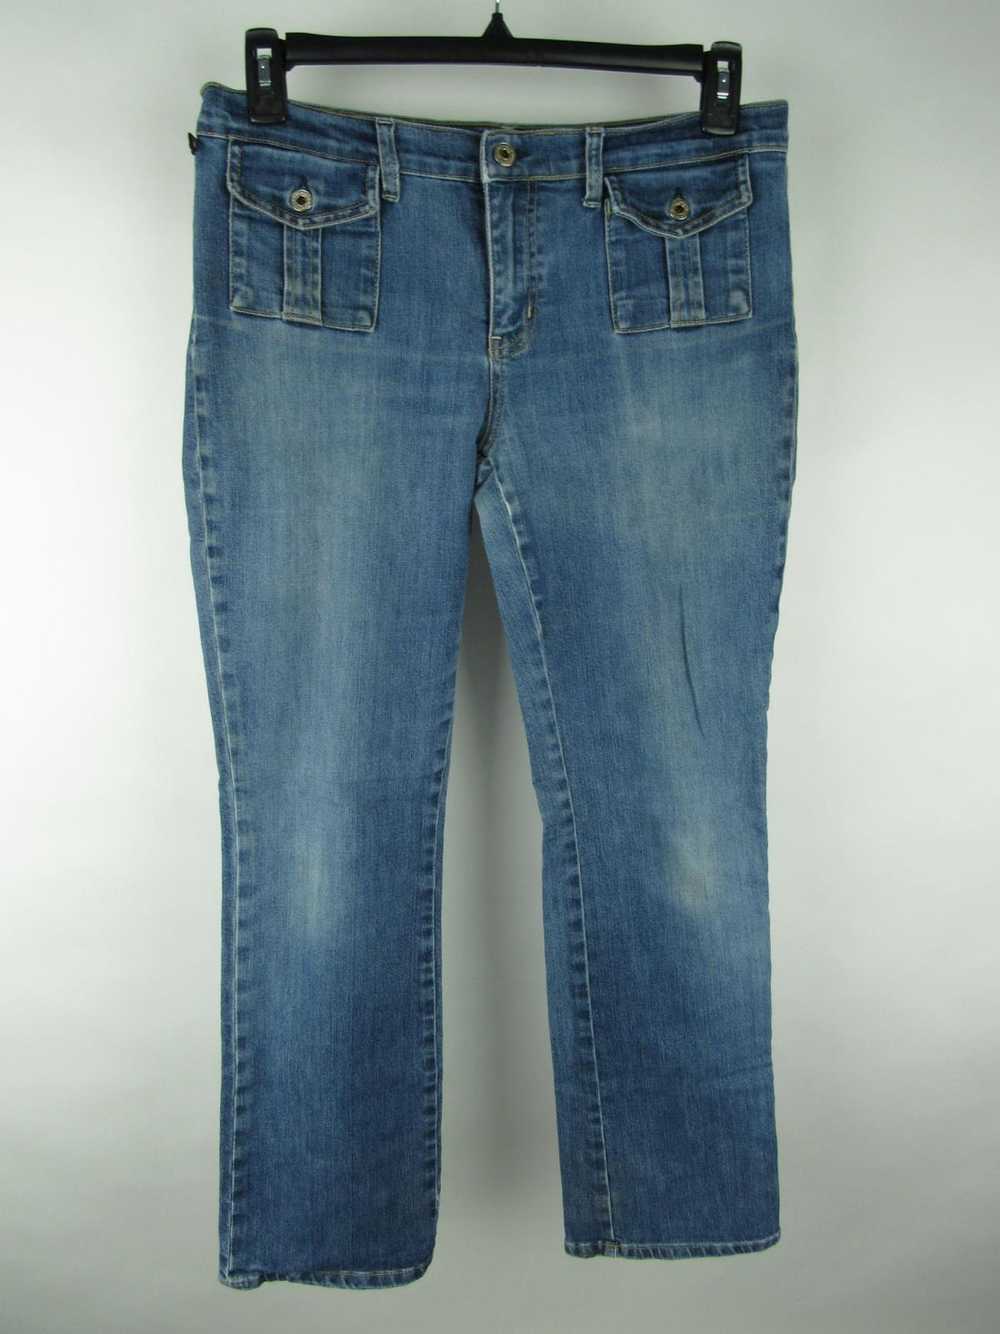 Polo Jeans Company Ralph Lauren Straight Jeans - image 1